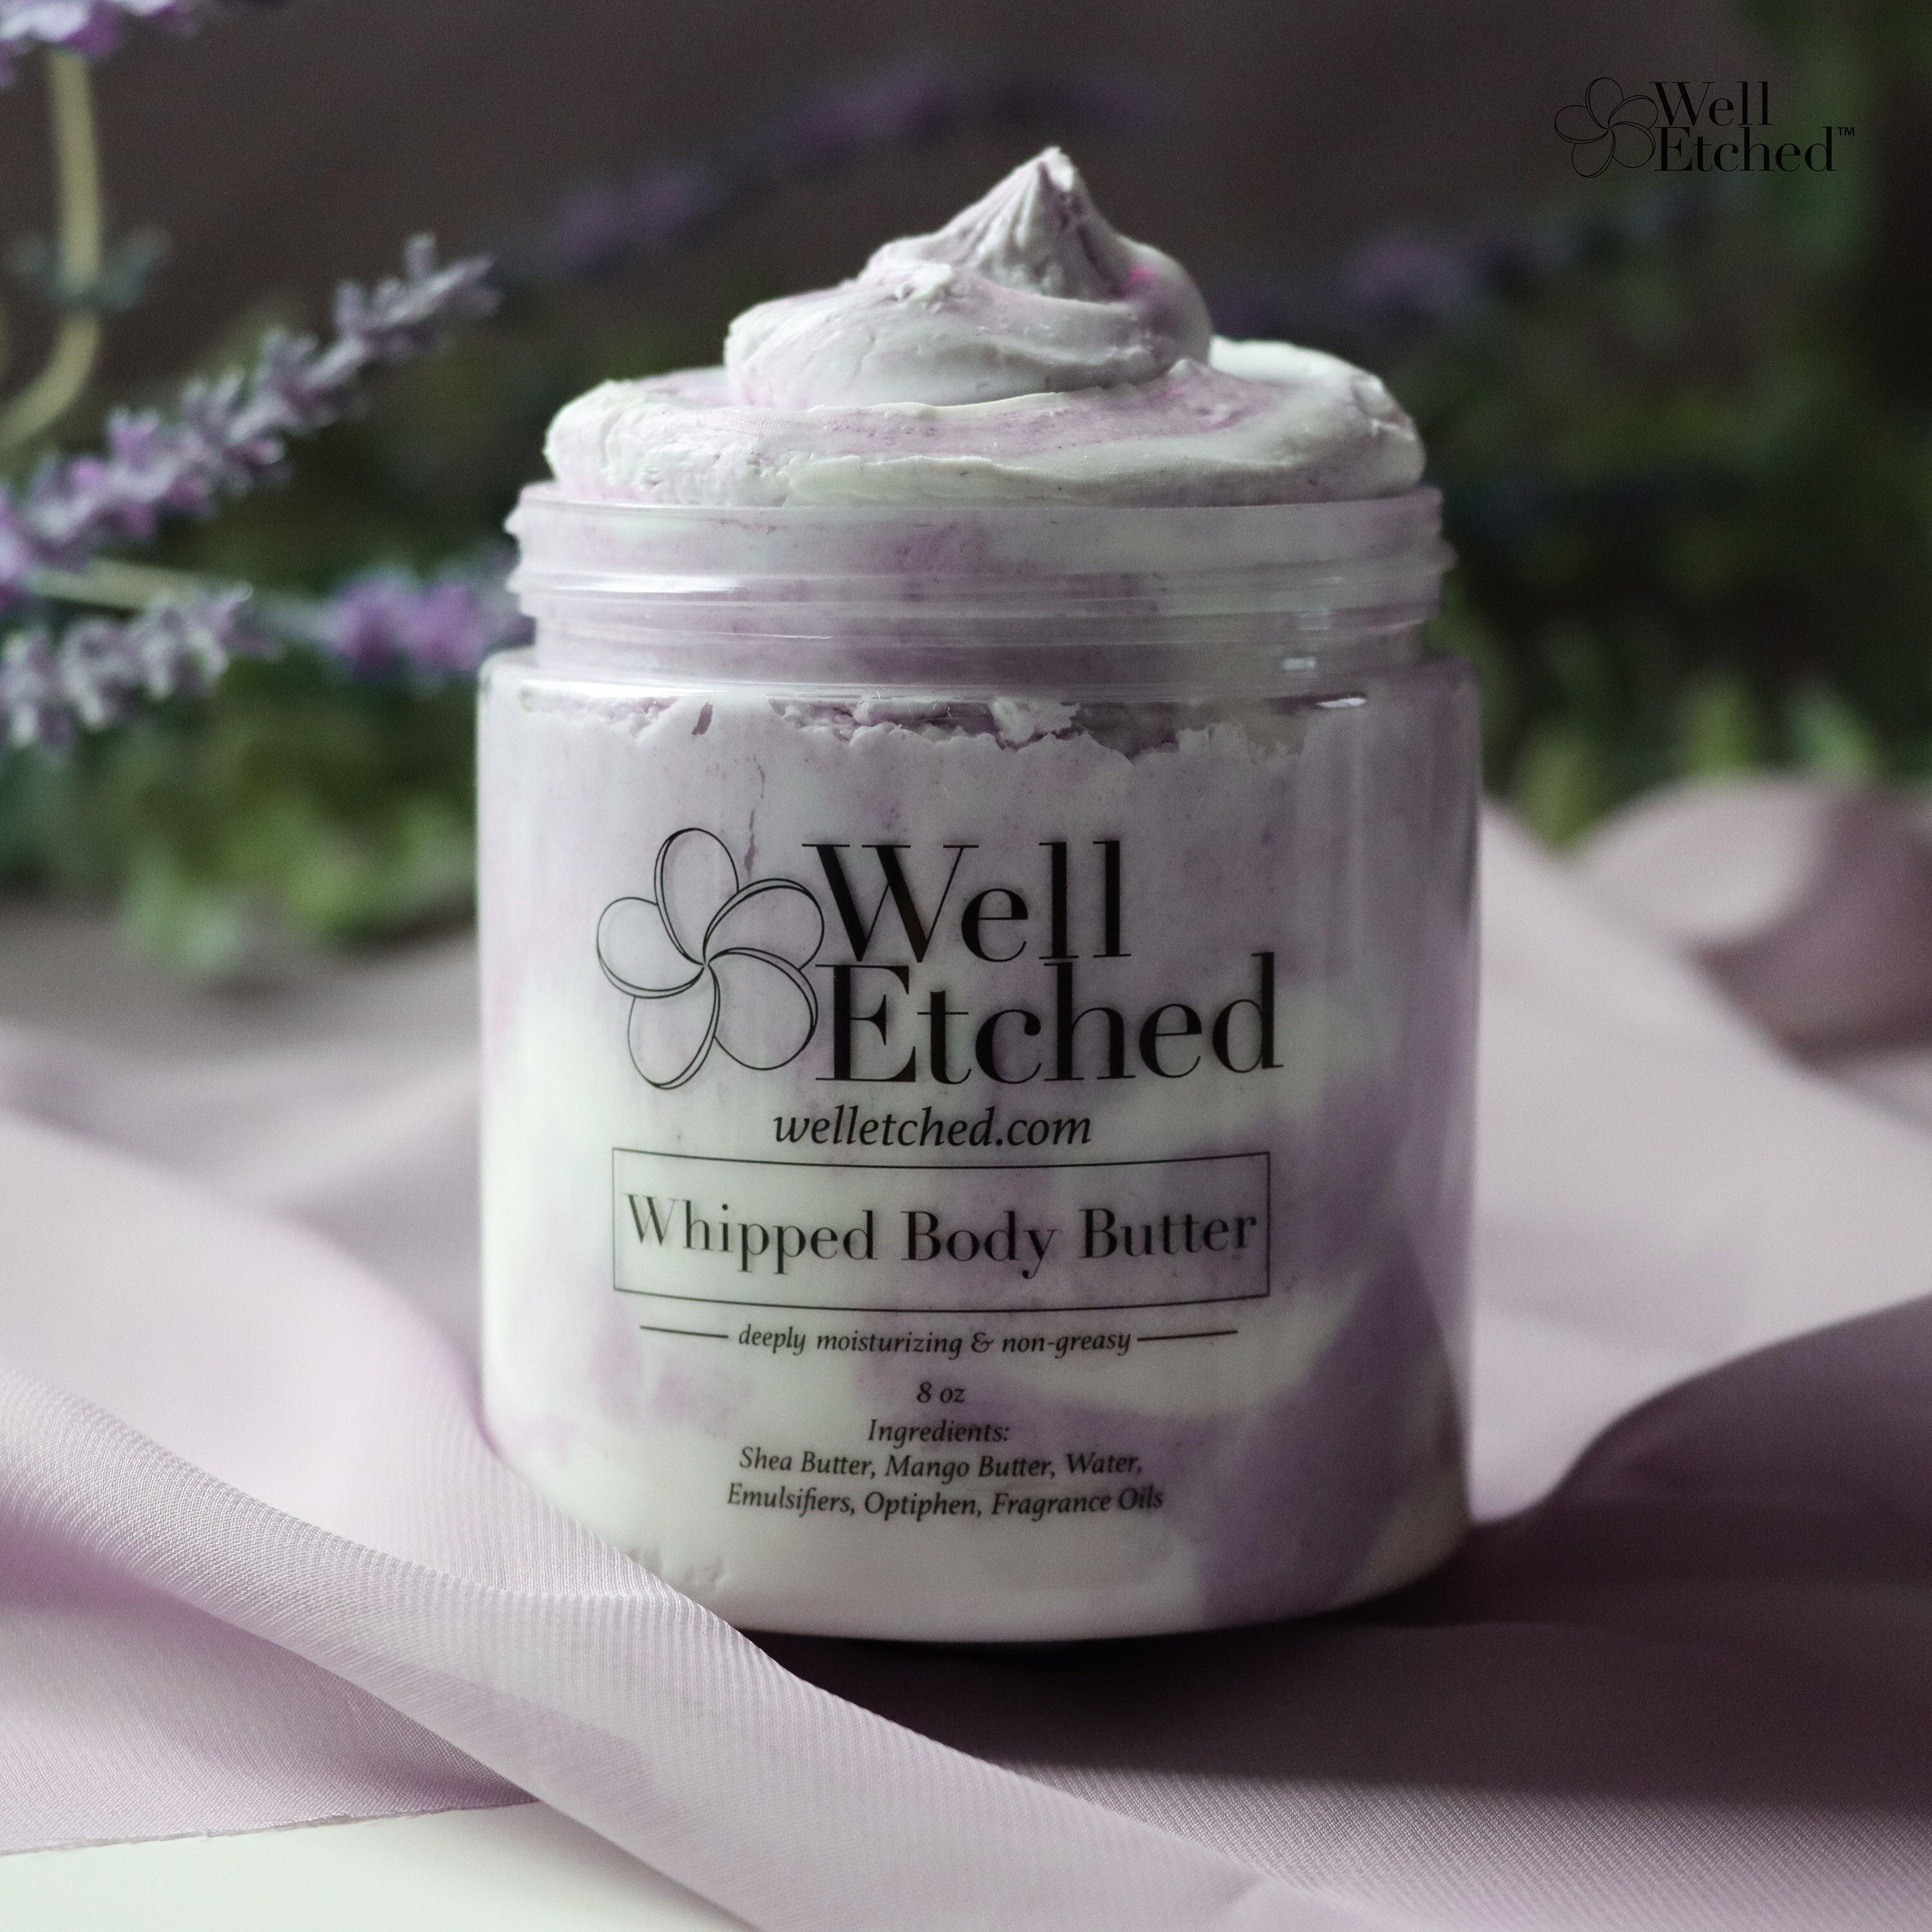 Better Shea Butter Whipped Body Butter Lavender Neroli - Body Moisturizer with Raw Shea Butter for Dry & Delicate Skin, Paraben